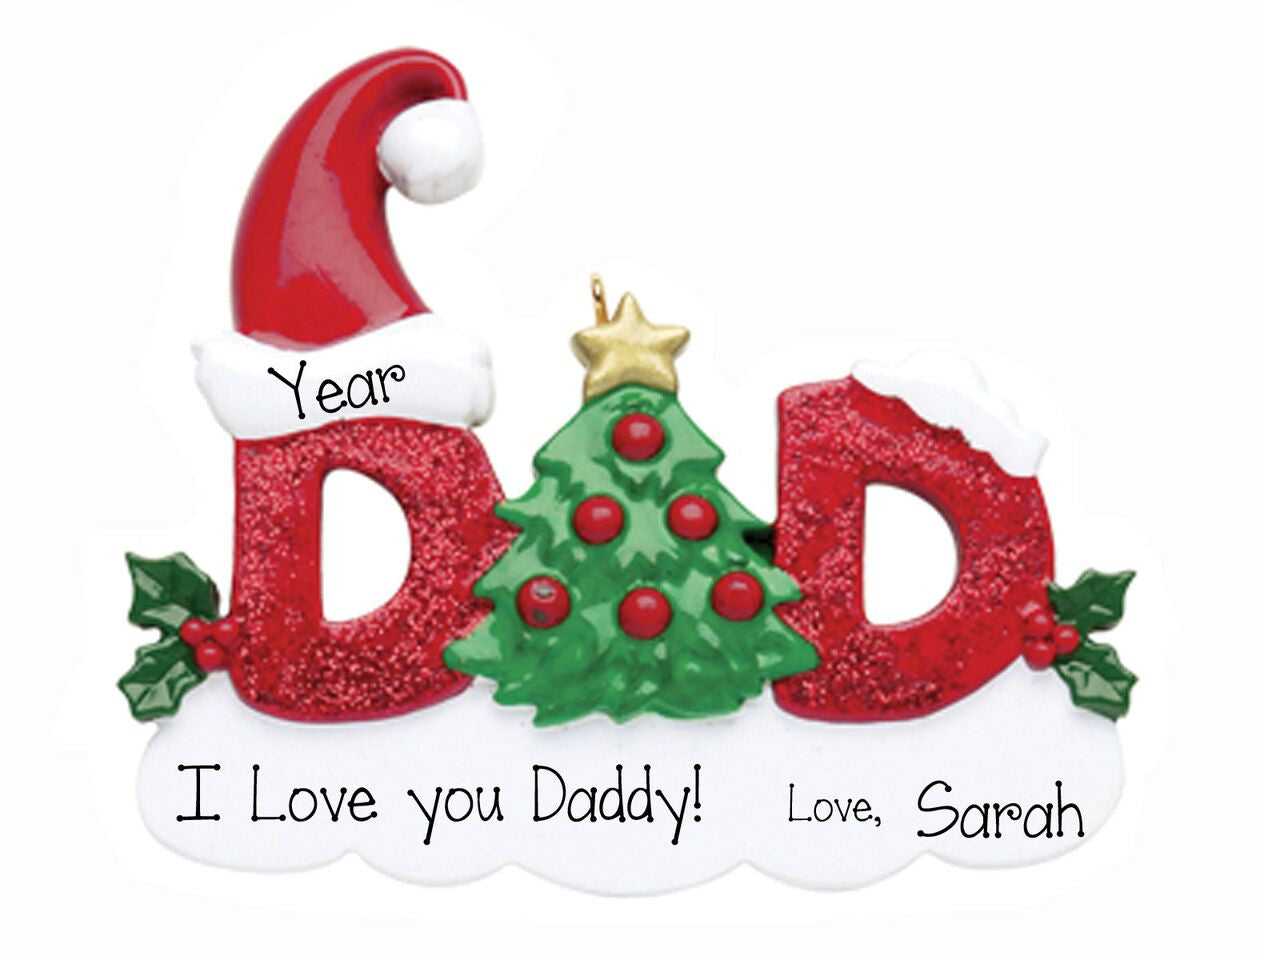 Dad My Personalized Ornaments